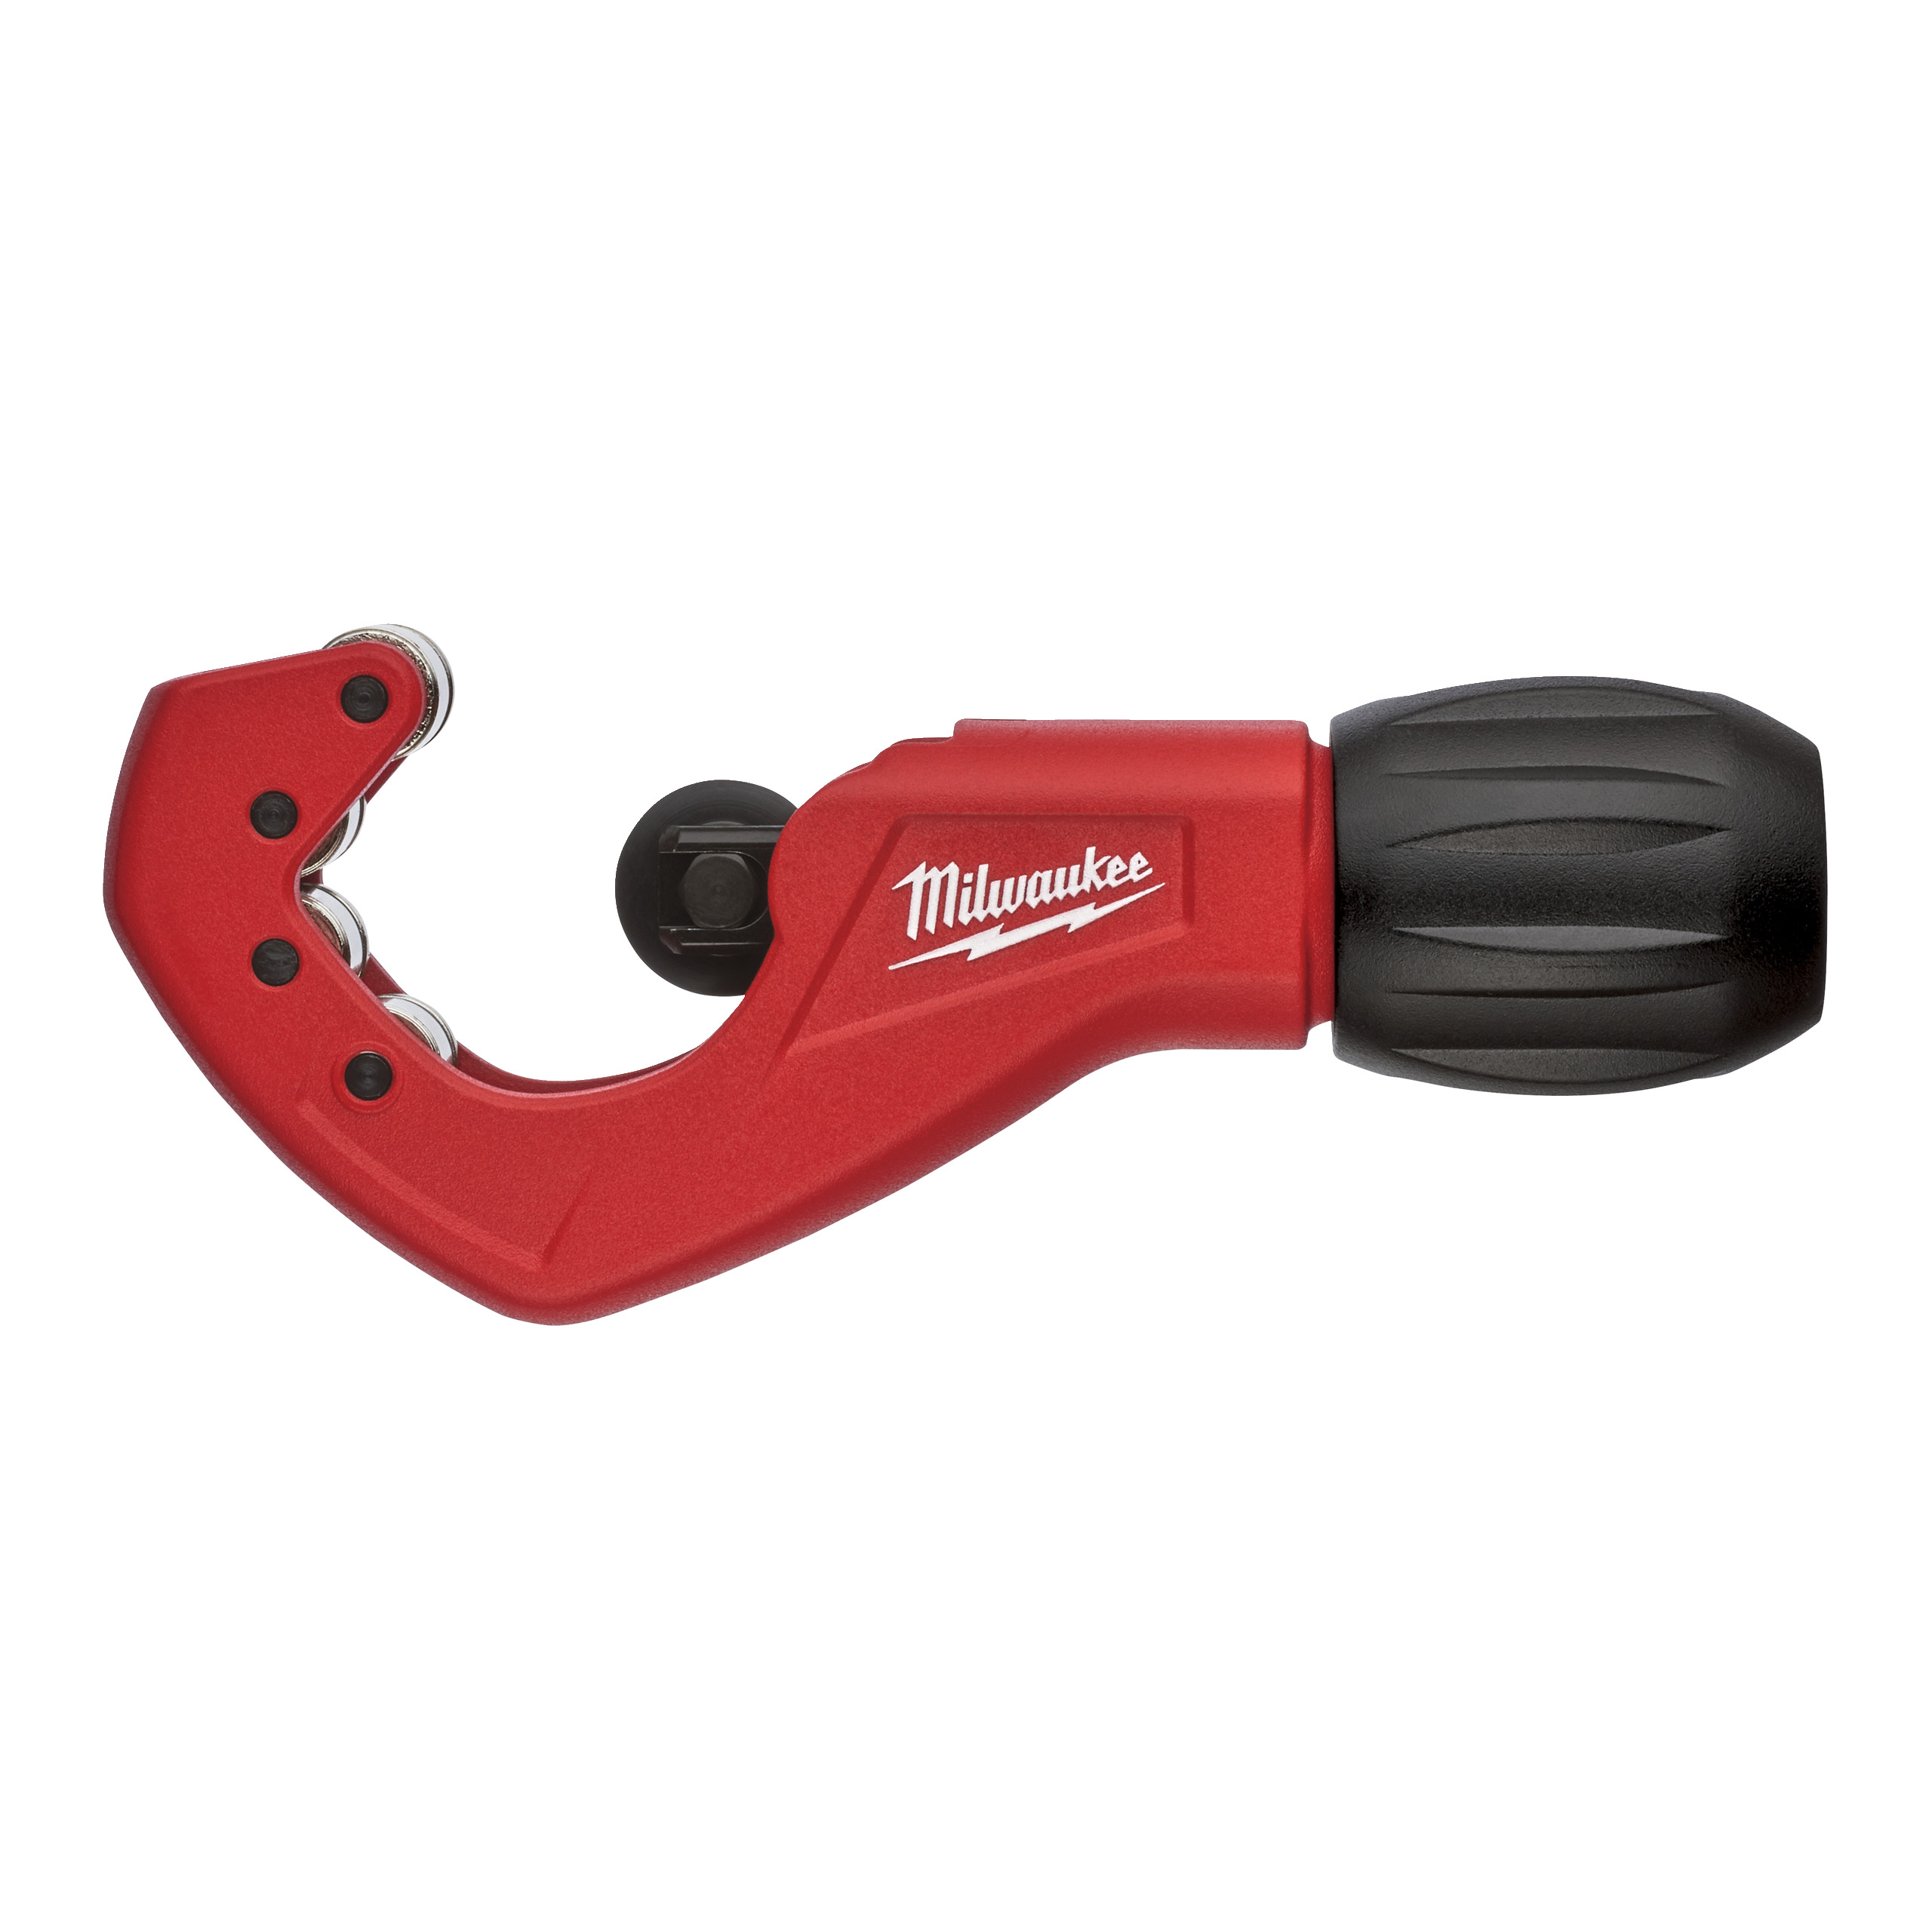 Milwaukee Constant Swing Copper Tubing Cutter 28 mm 48229259